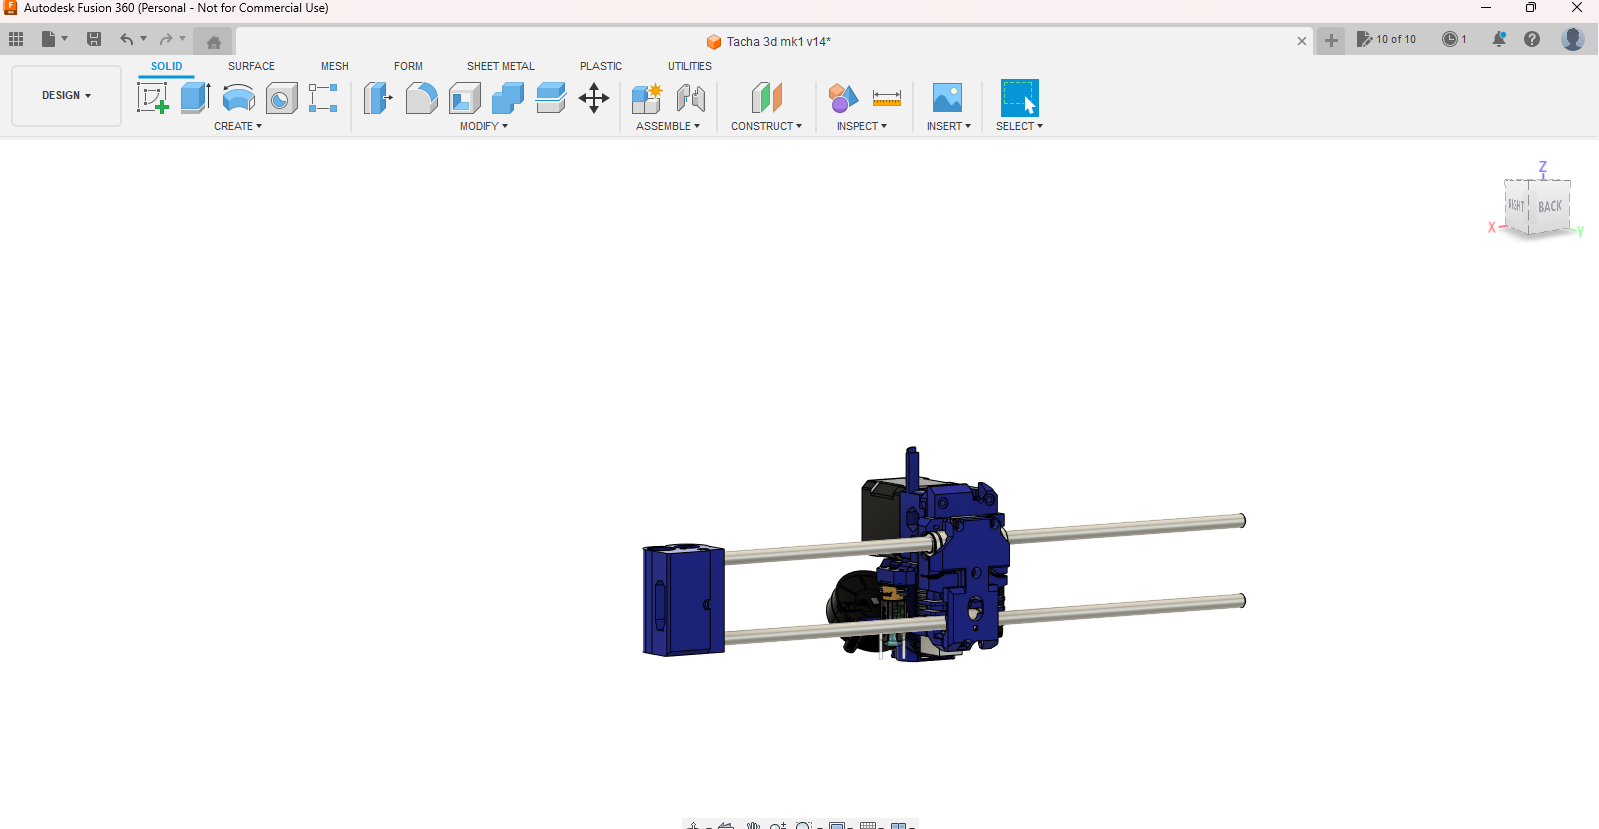 Autodesk Fusion 360 (Personal - Not for Commercial Use) 6_30_2023 9_04_31 PM.png